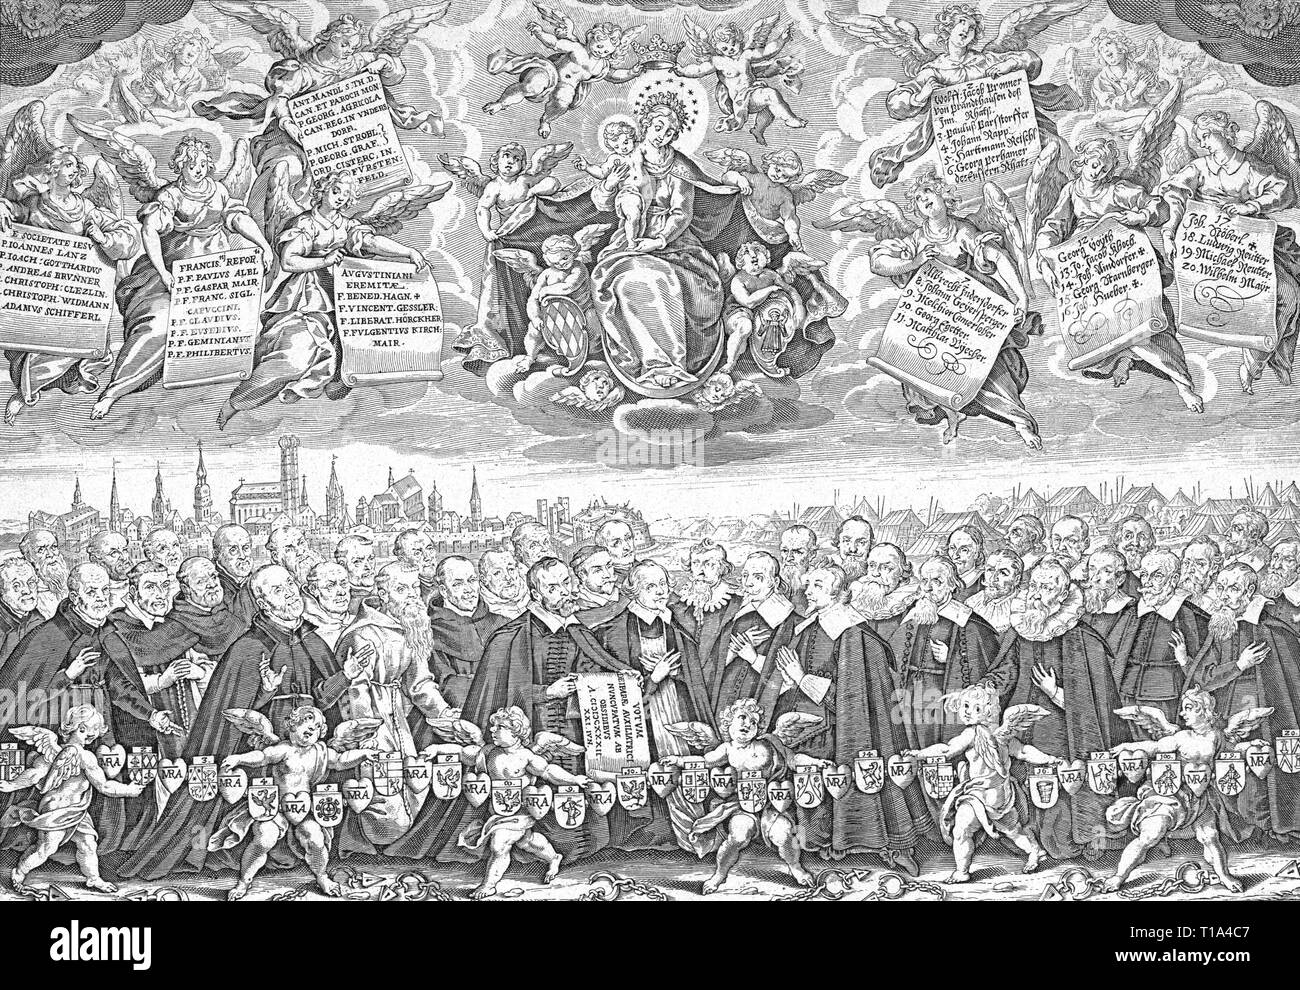 events, Thirty Years' war 1618 - 1648, 42 Munich hostages of king Gustav Adolf of Sweden and their votive picture for the church St. Mary, Ramersdorf, wood engraving, 19th century, Artist's Copyright has not to be cleared Stock Photo